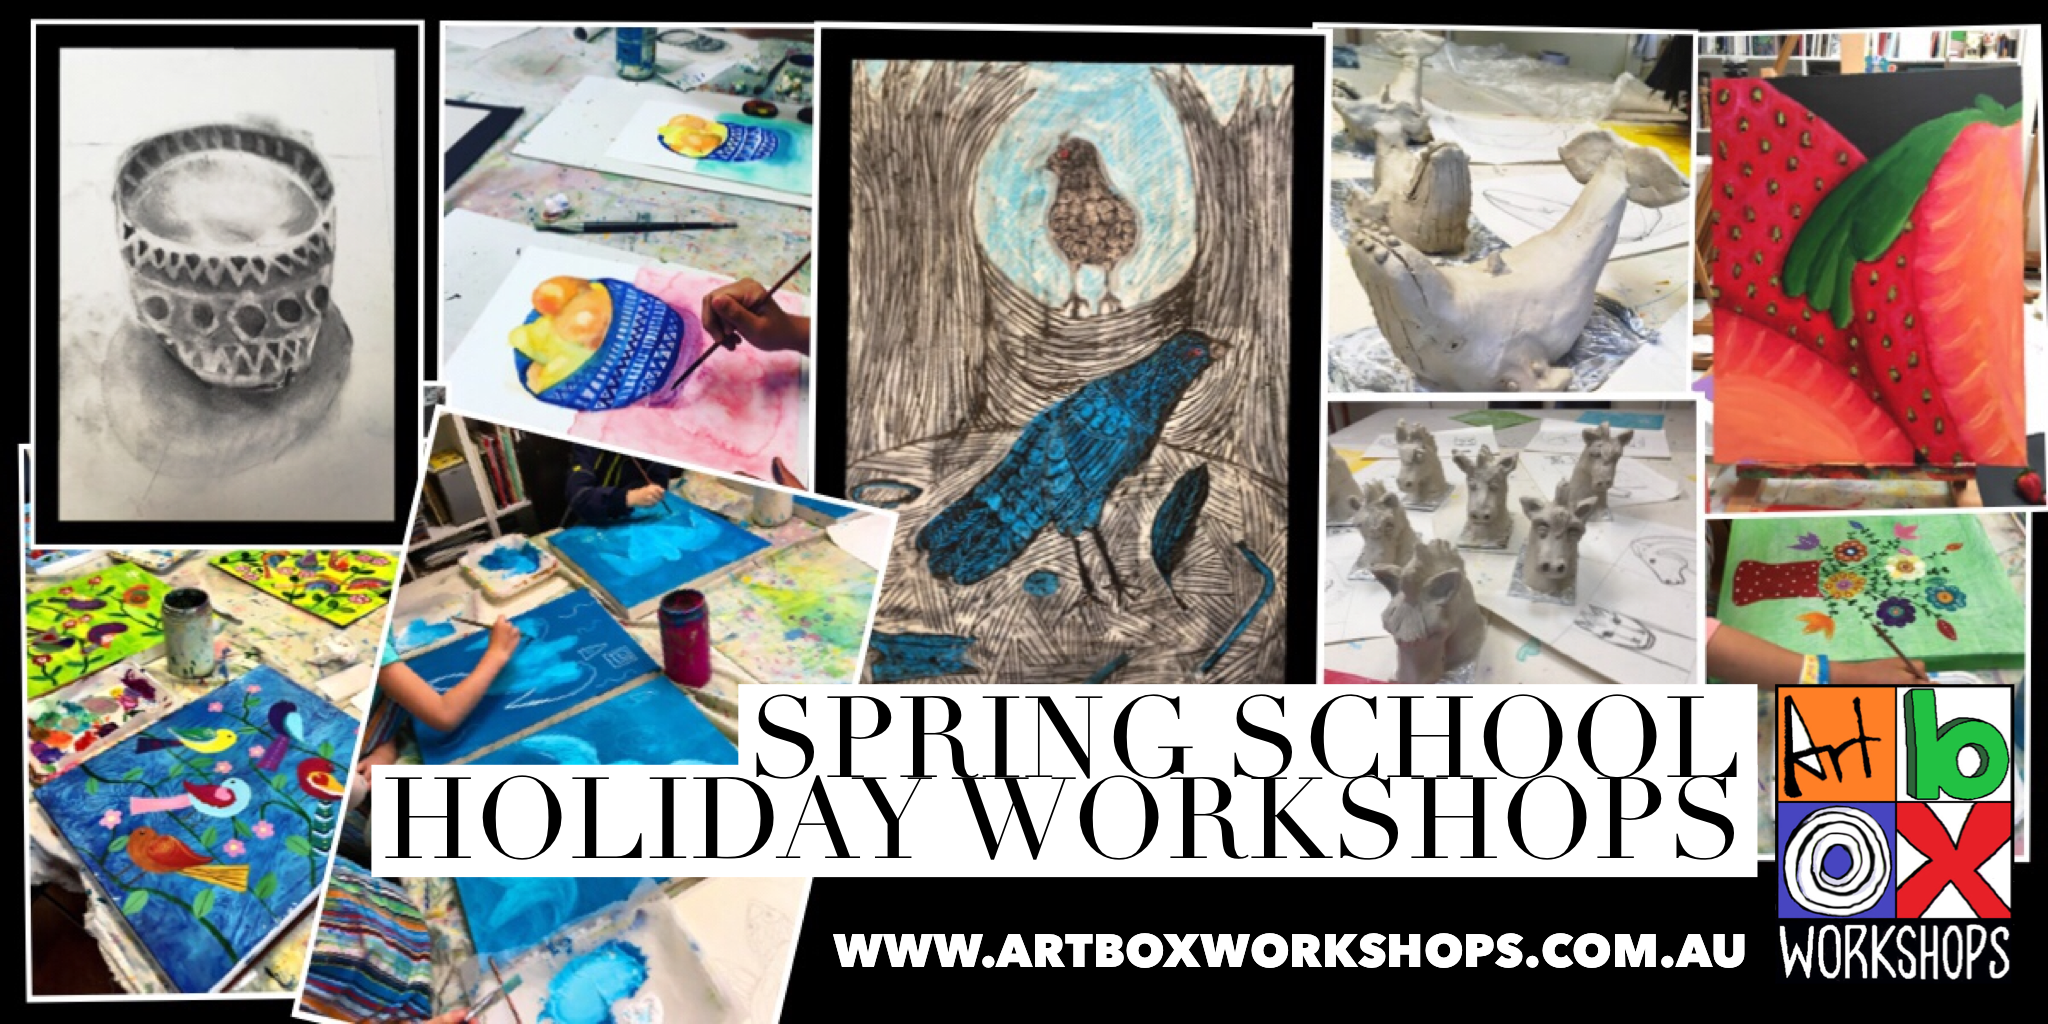 Art Box Workshops Spring school holiday program, we offer workshops in painting, drawing, printmaking and sculpture for children who love art.